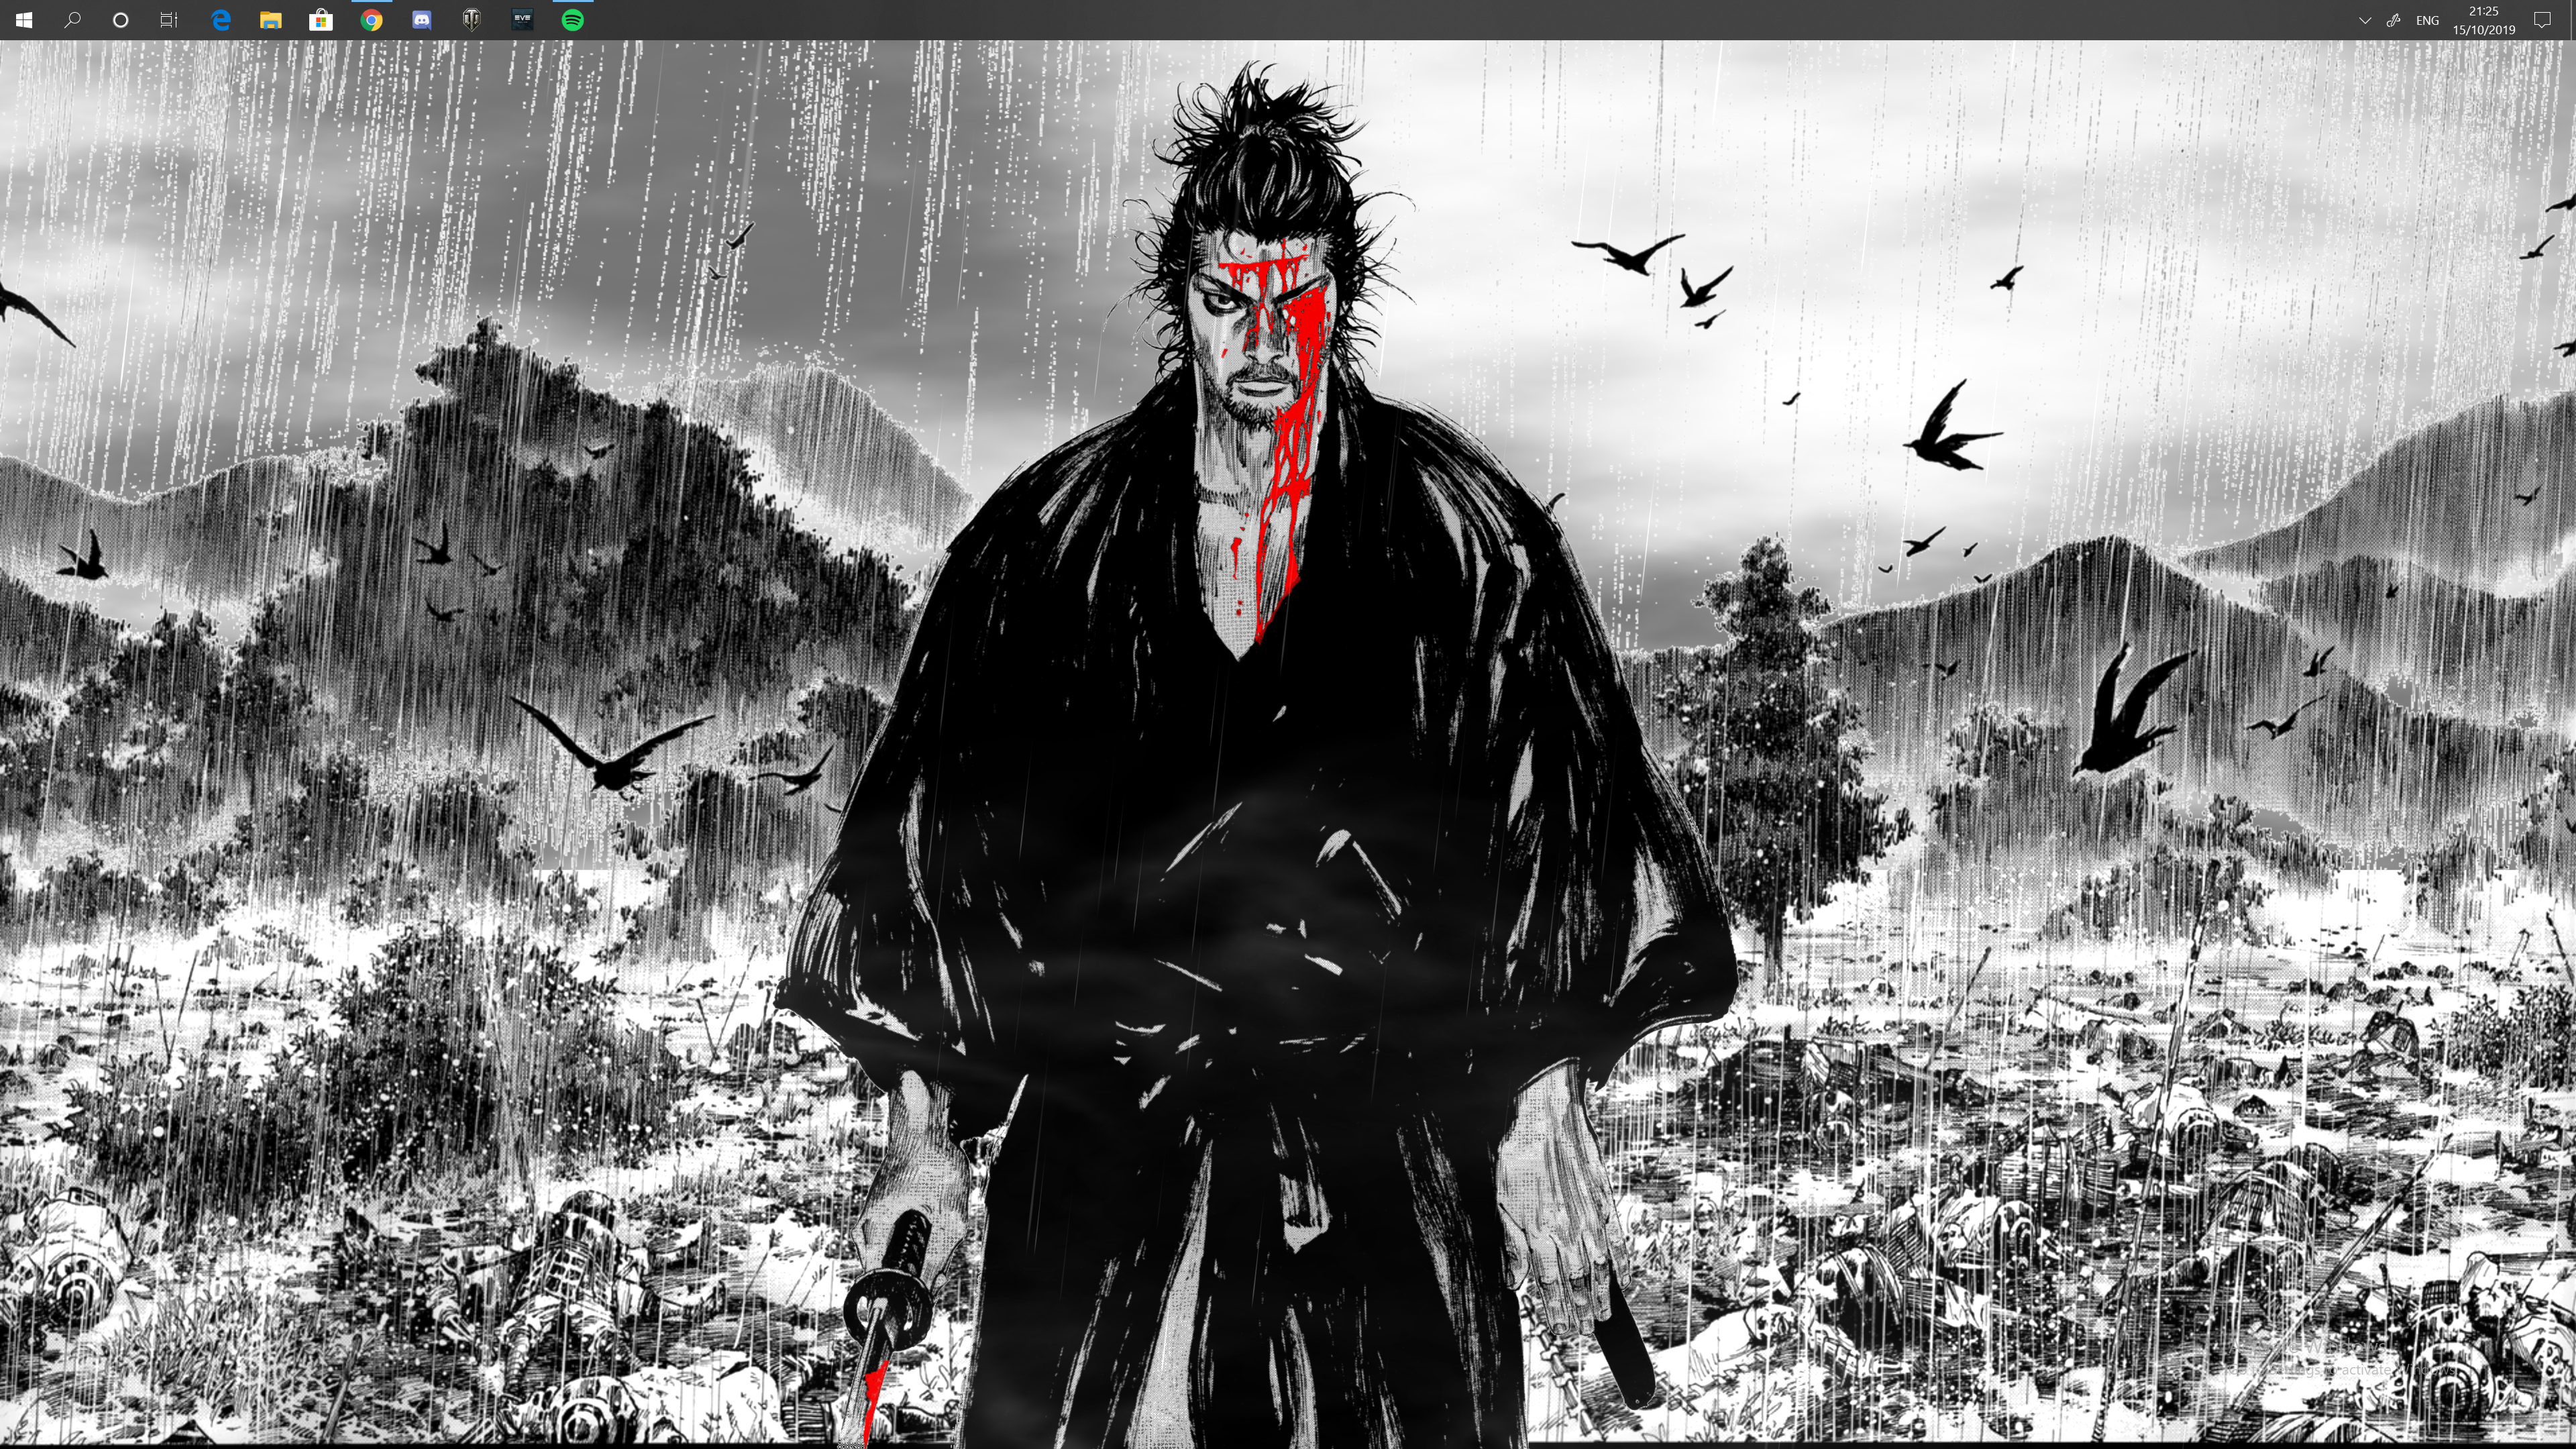 Vagabond wallpaper are available on wallpaper engine